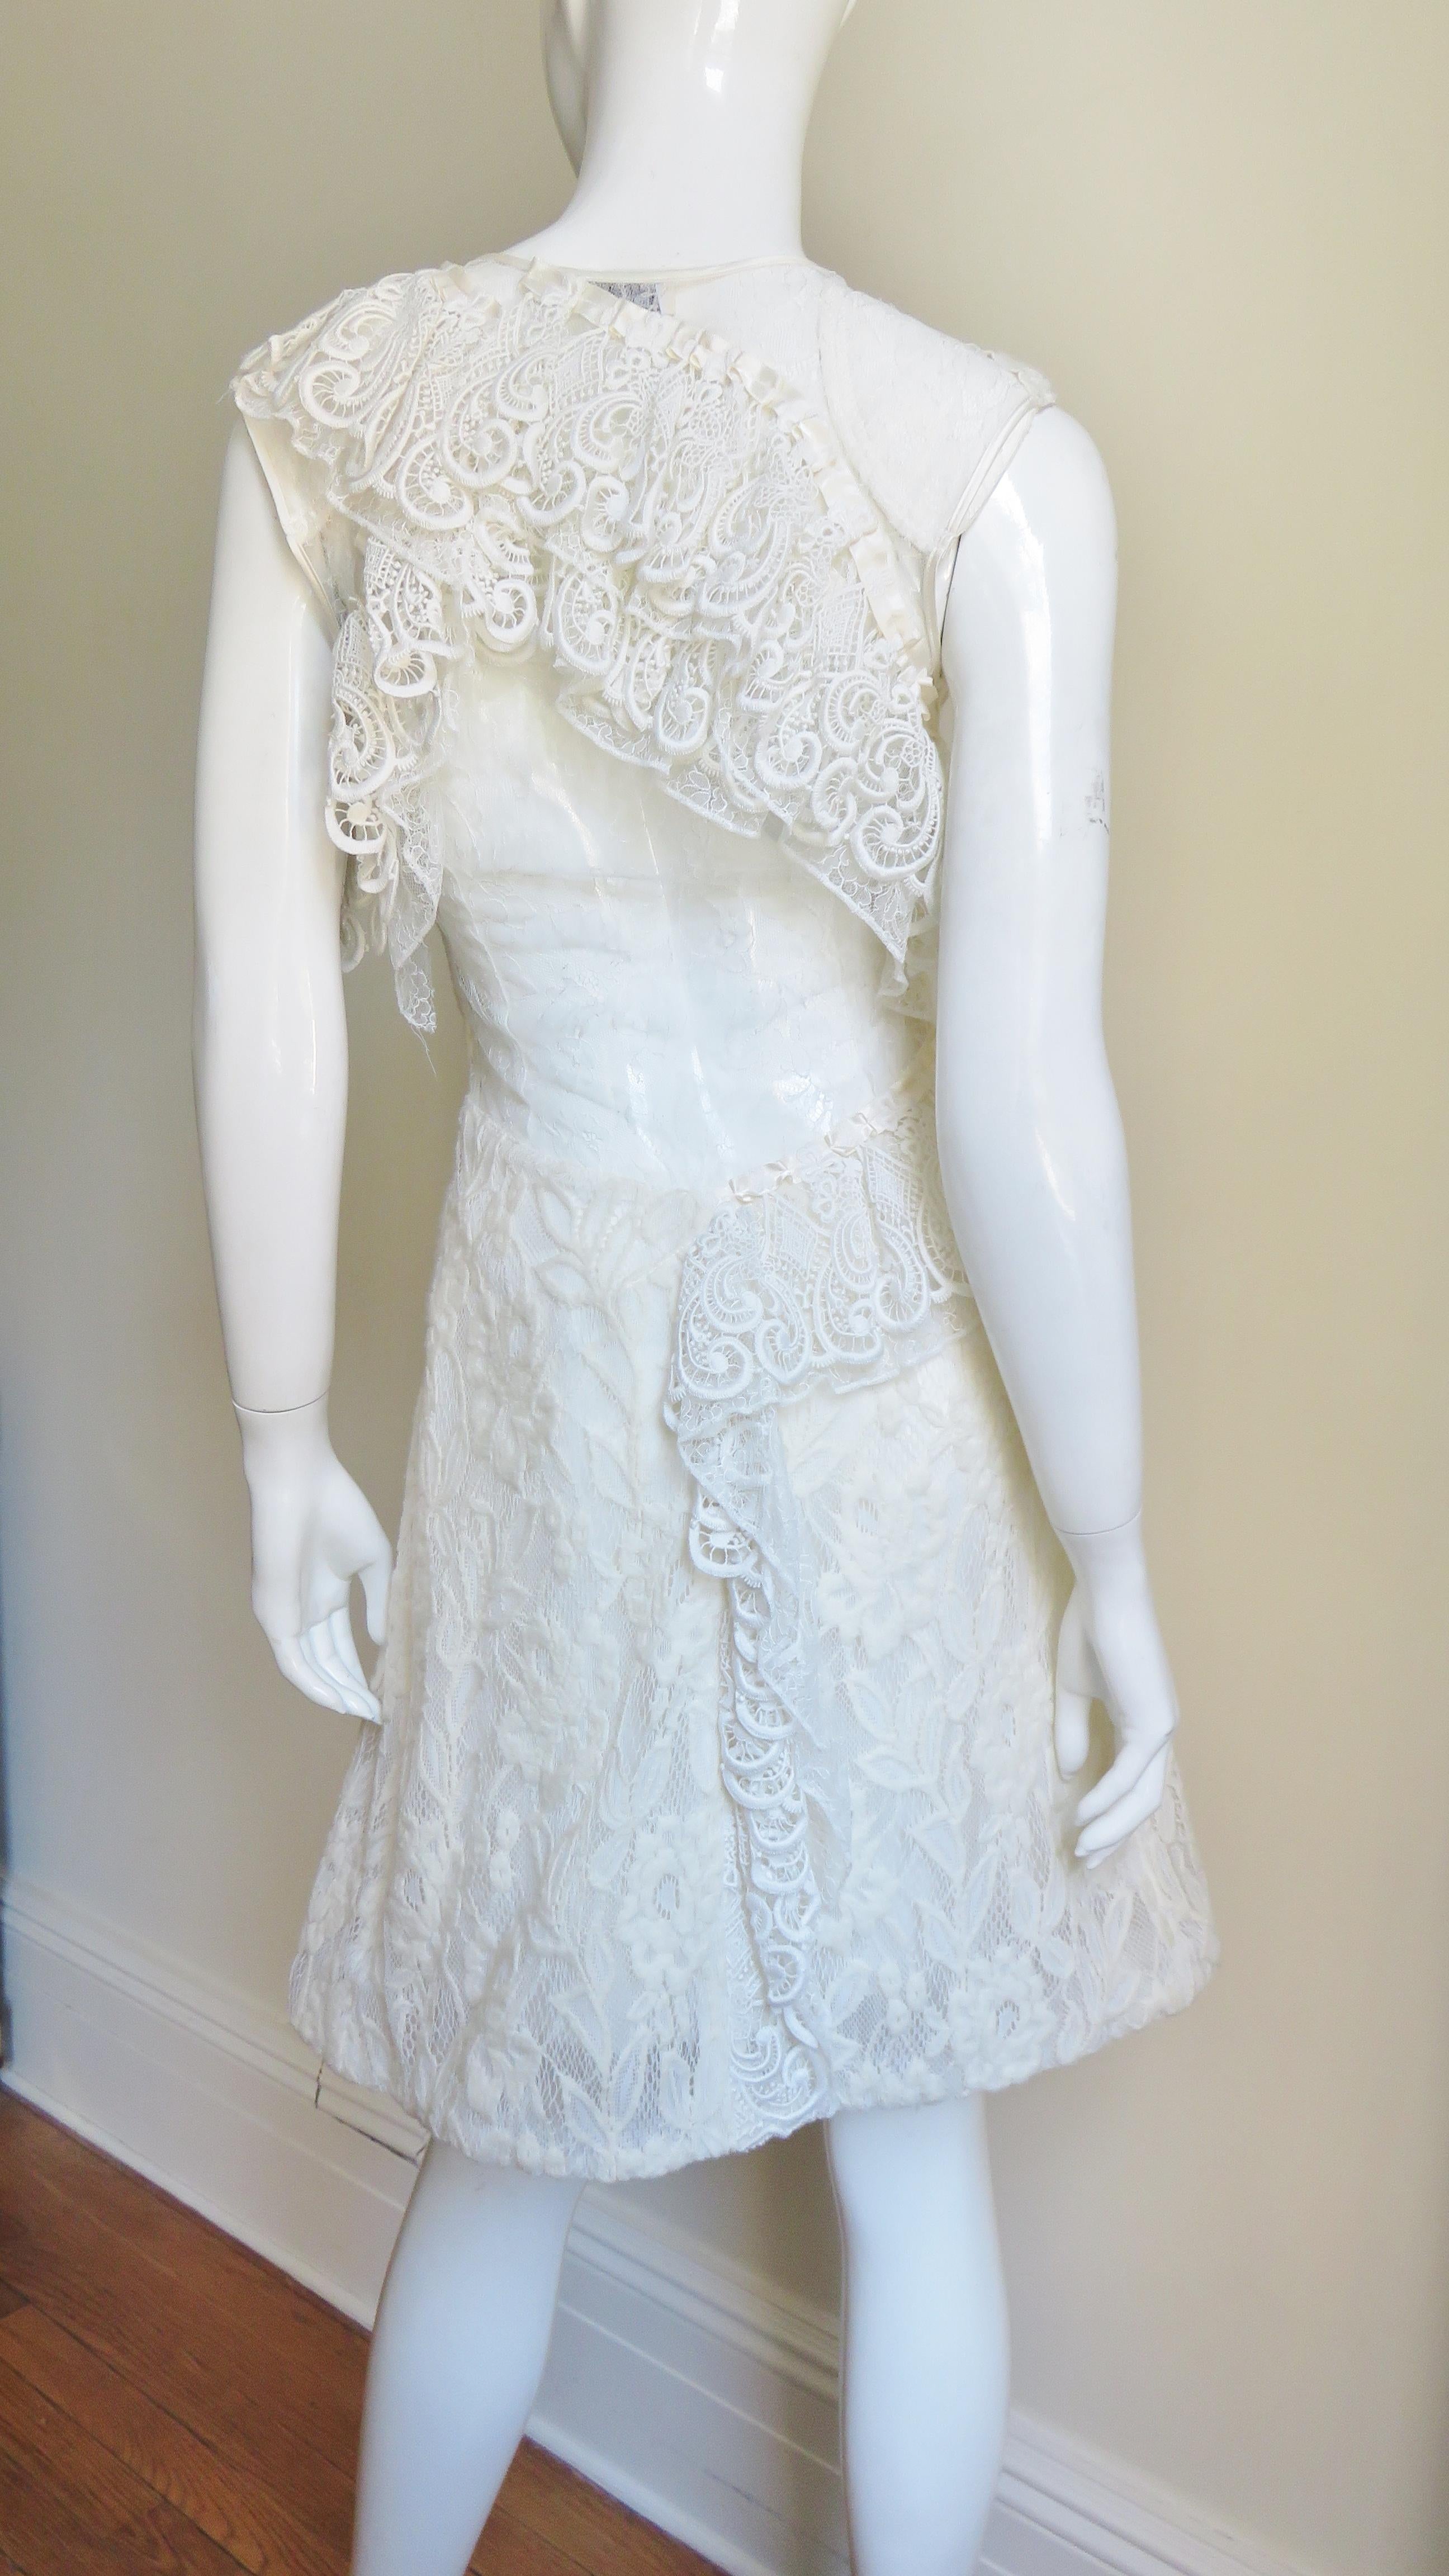 A gorgeous dress from Nina Ricci in white laces.  From the front it is a simple V neck sleeveless A line dress in white lace.  It is cutout from lower back to upper and covered in sheer white lace with a double lace ruffle draping from it's upper